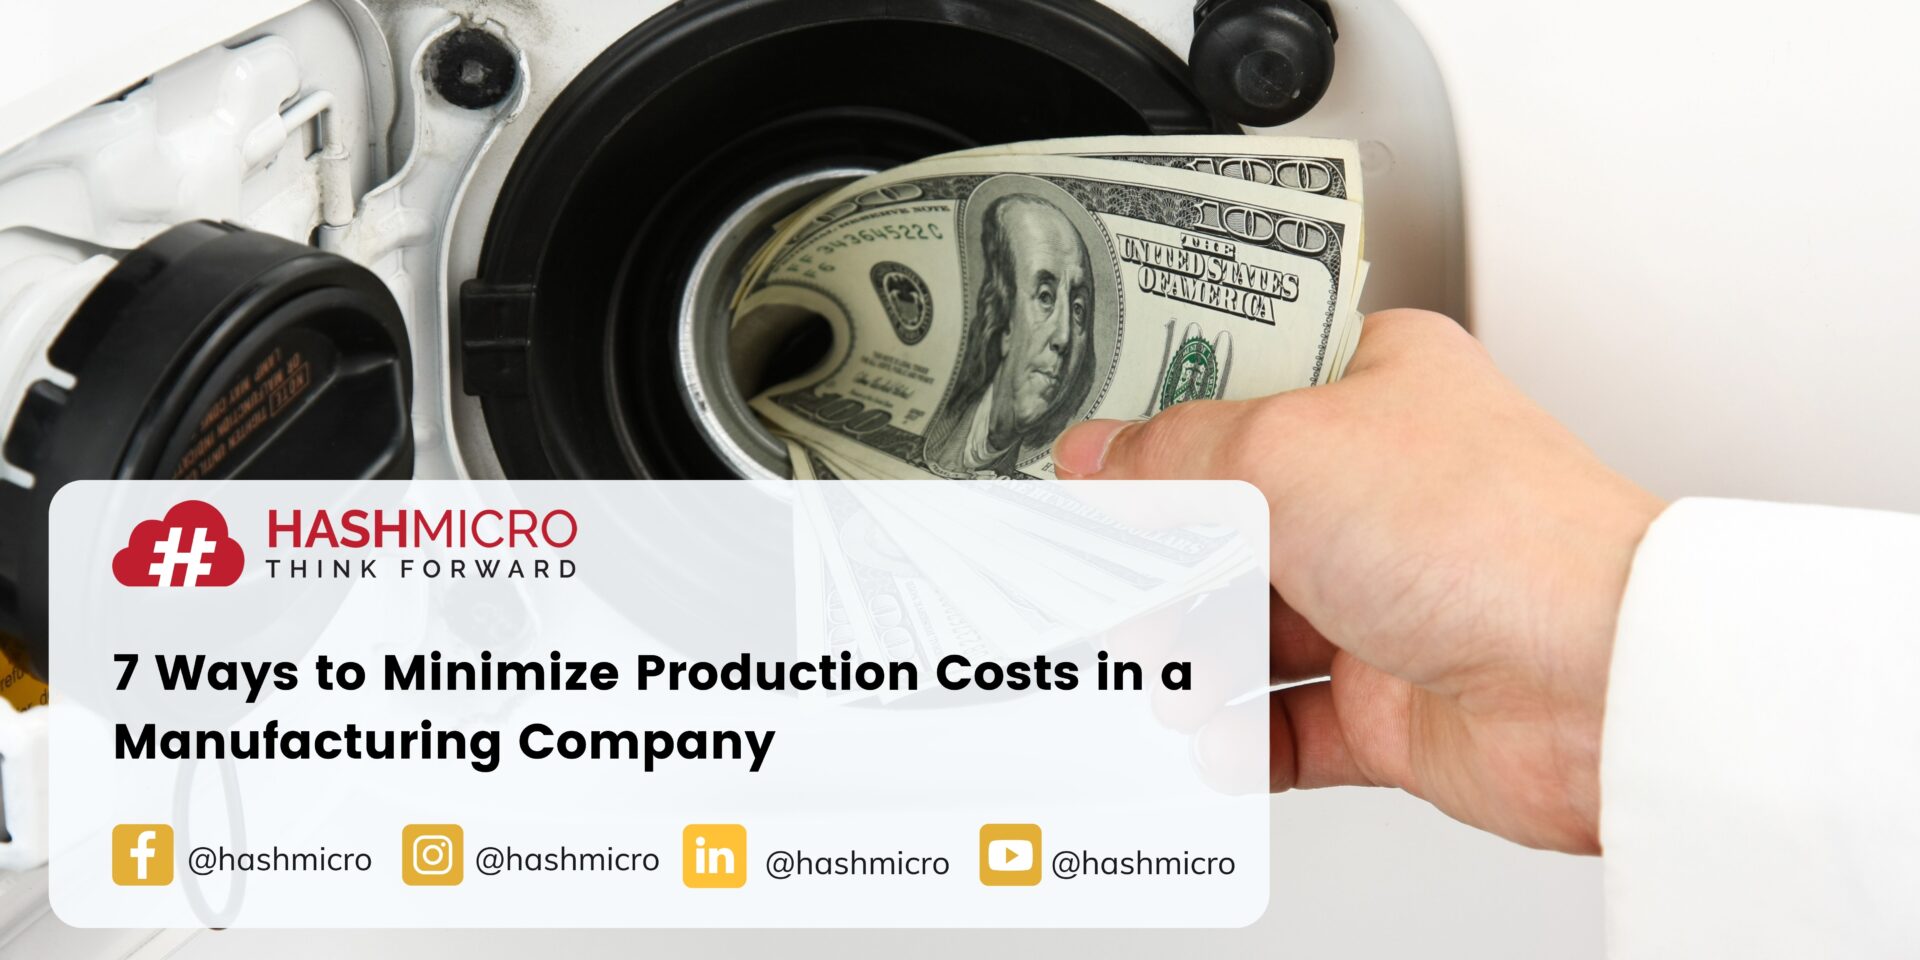 a business plan can also minimize the cost of production